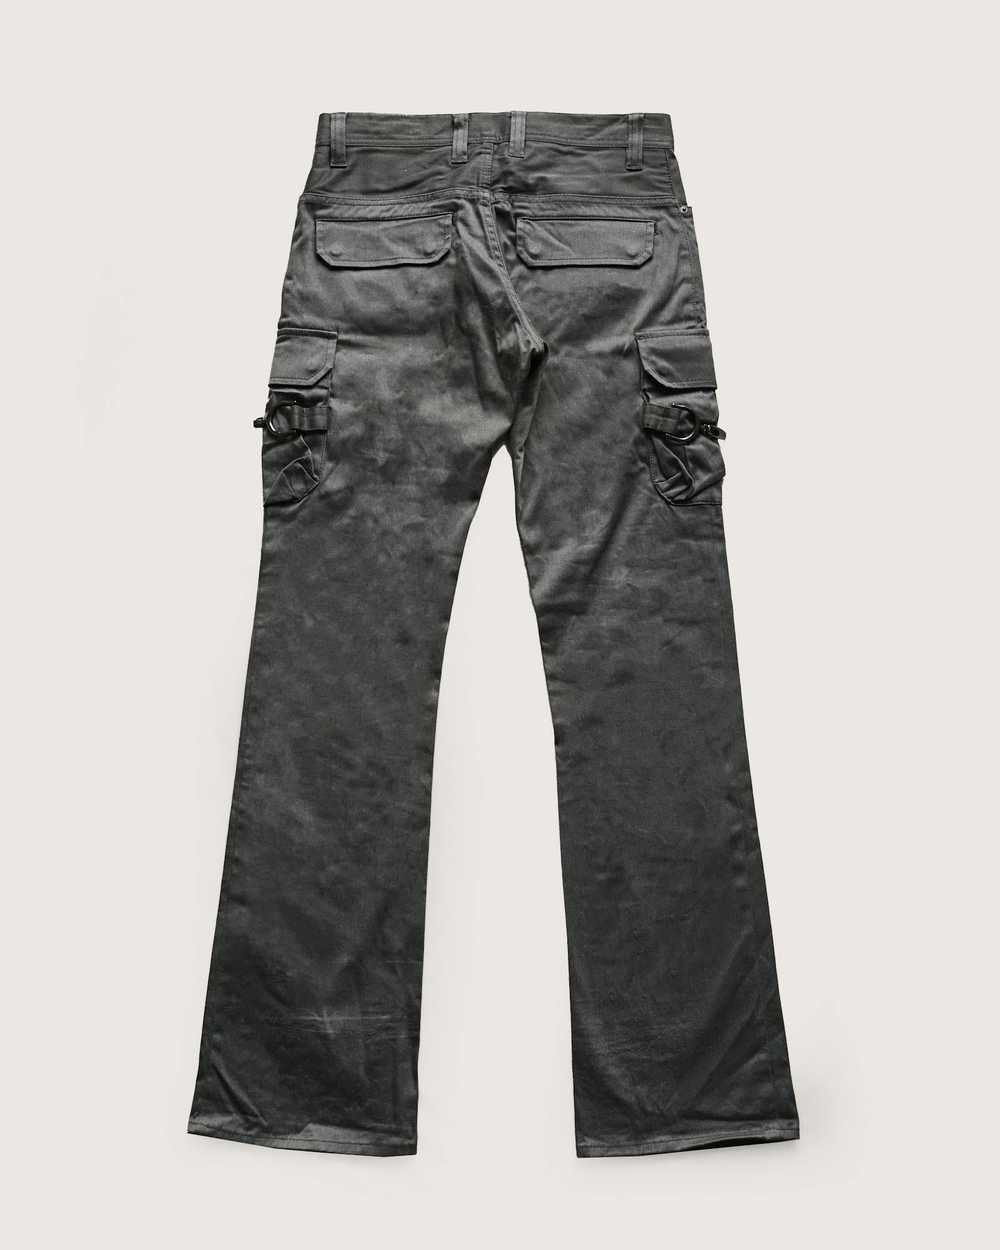 Tete Homme Tete Homme Military Style Flare Pants - image 3